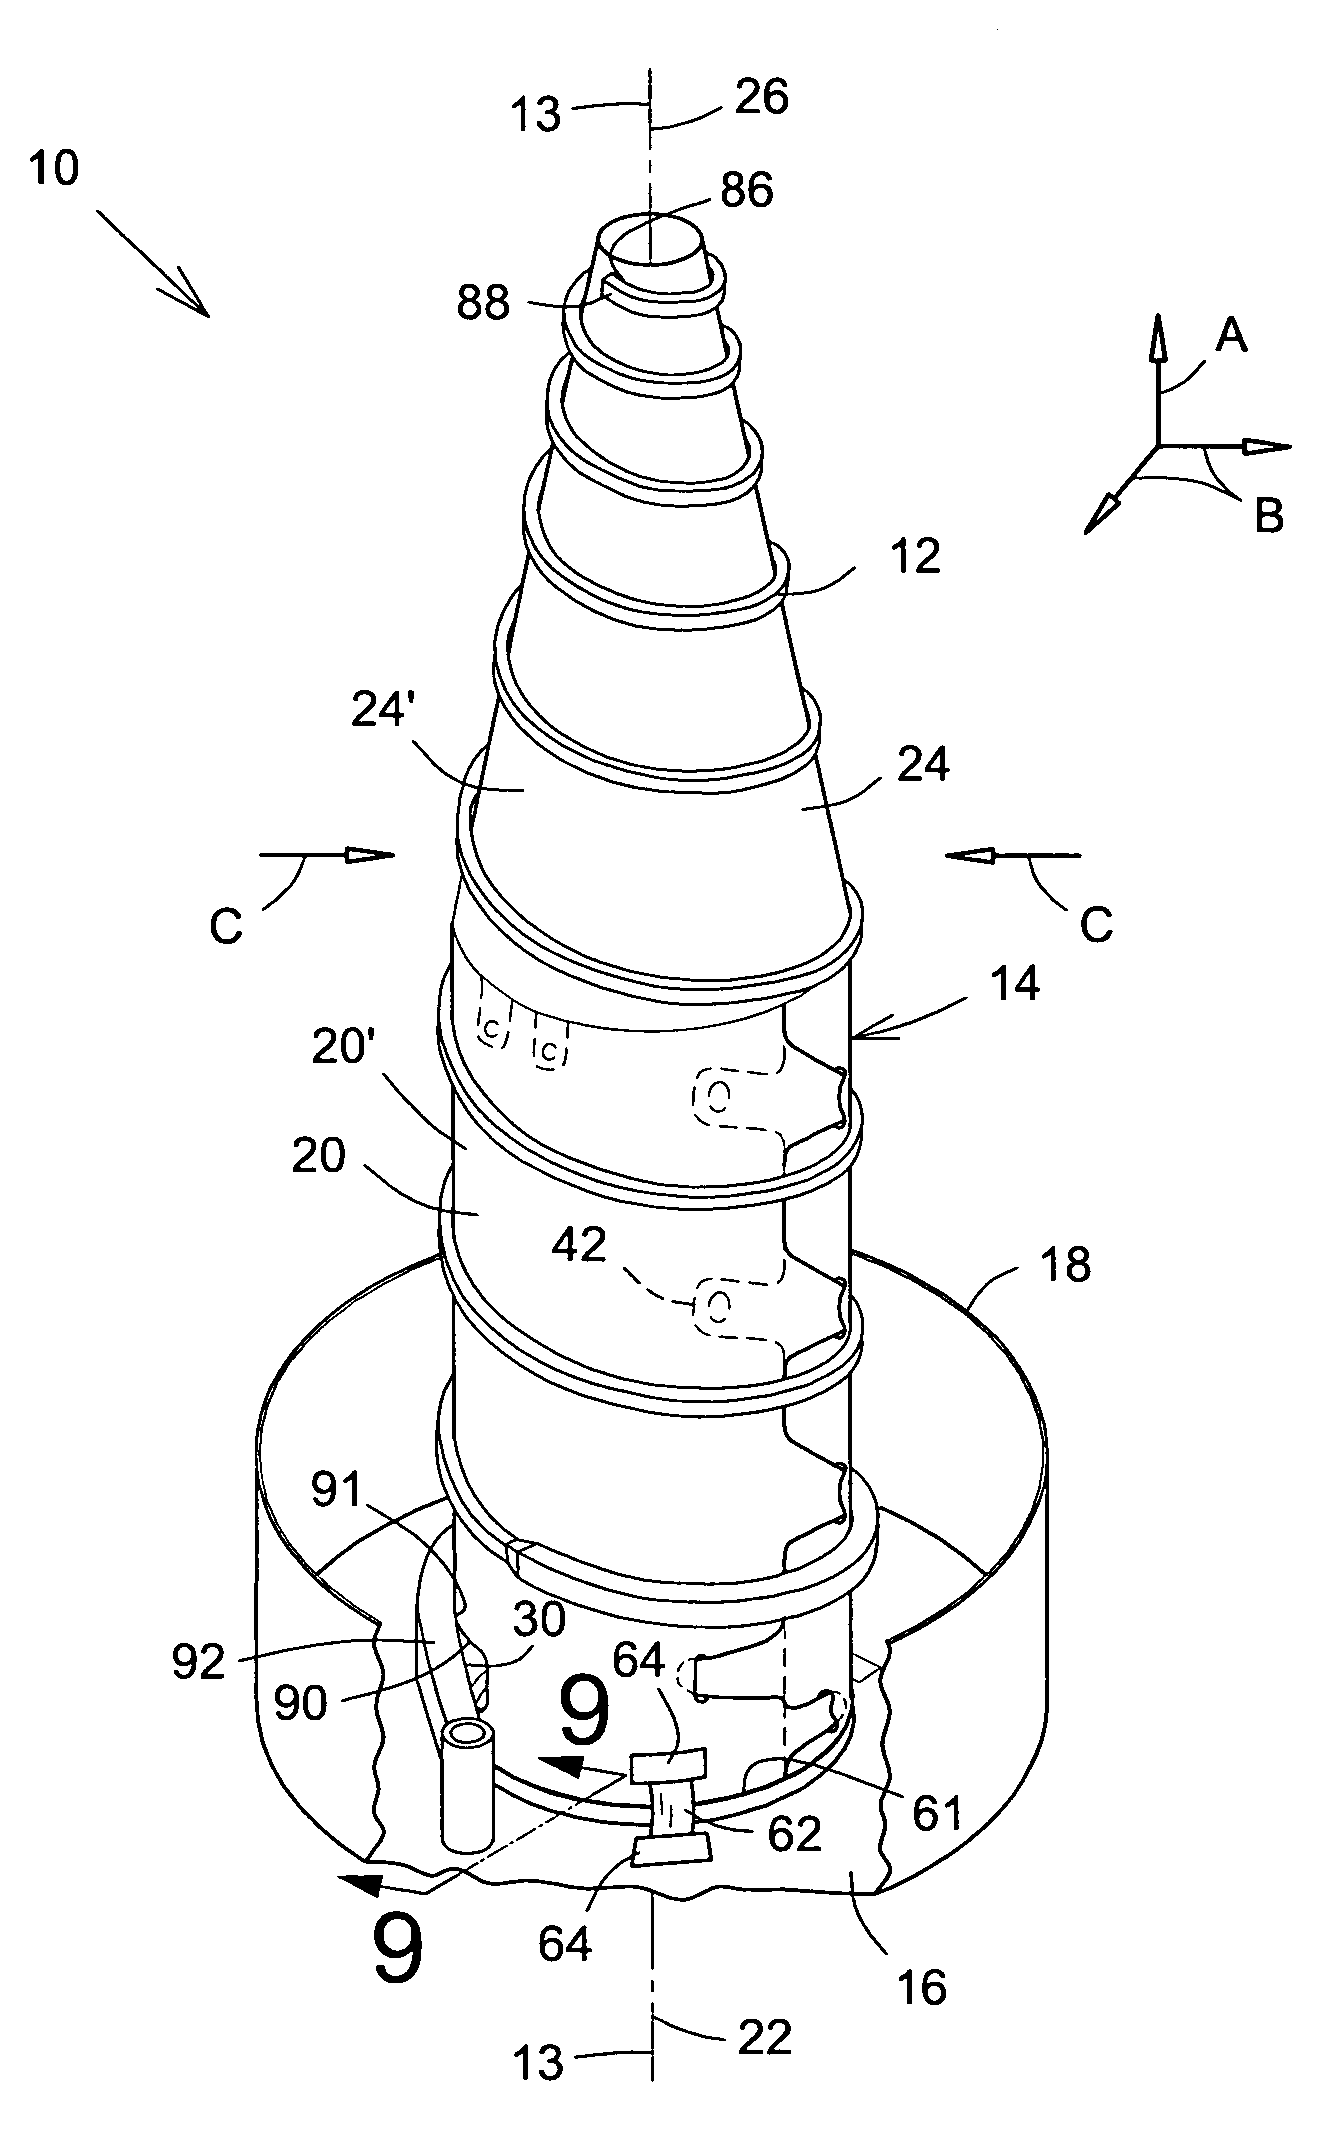 Helical antenna